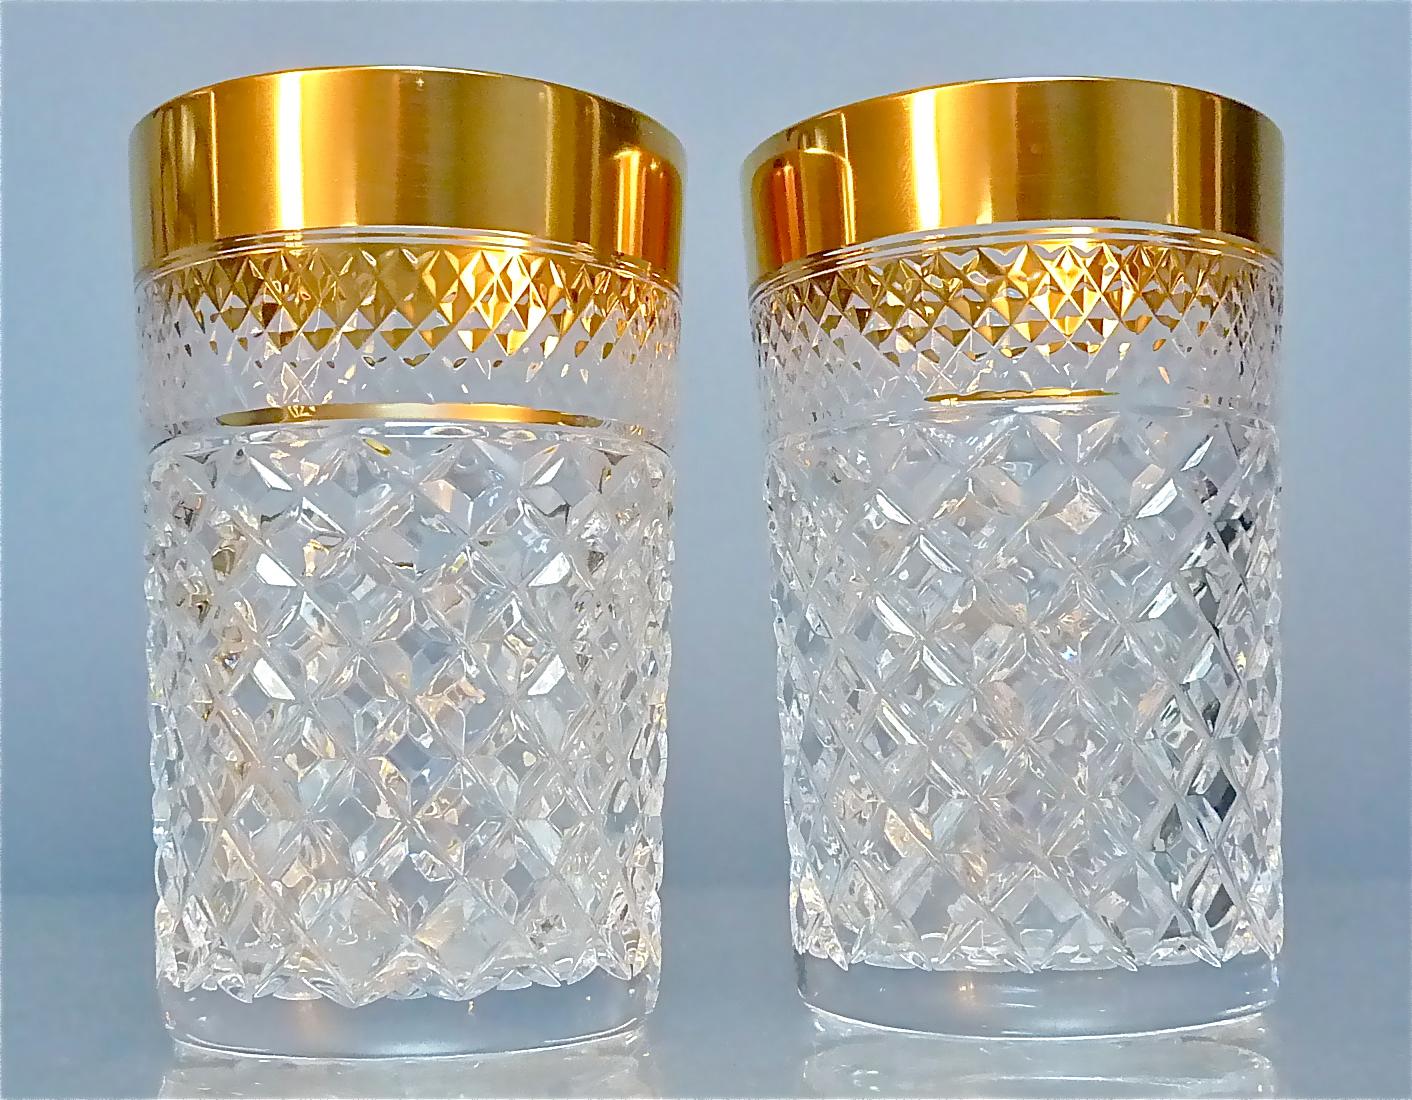 Precious 6 Water Glasses Gold Crystal Glass Tumbler Josephinenhuette Moser For Sale 2